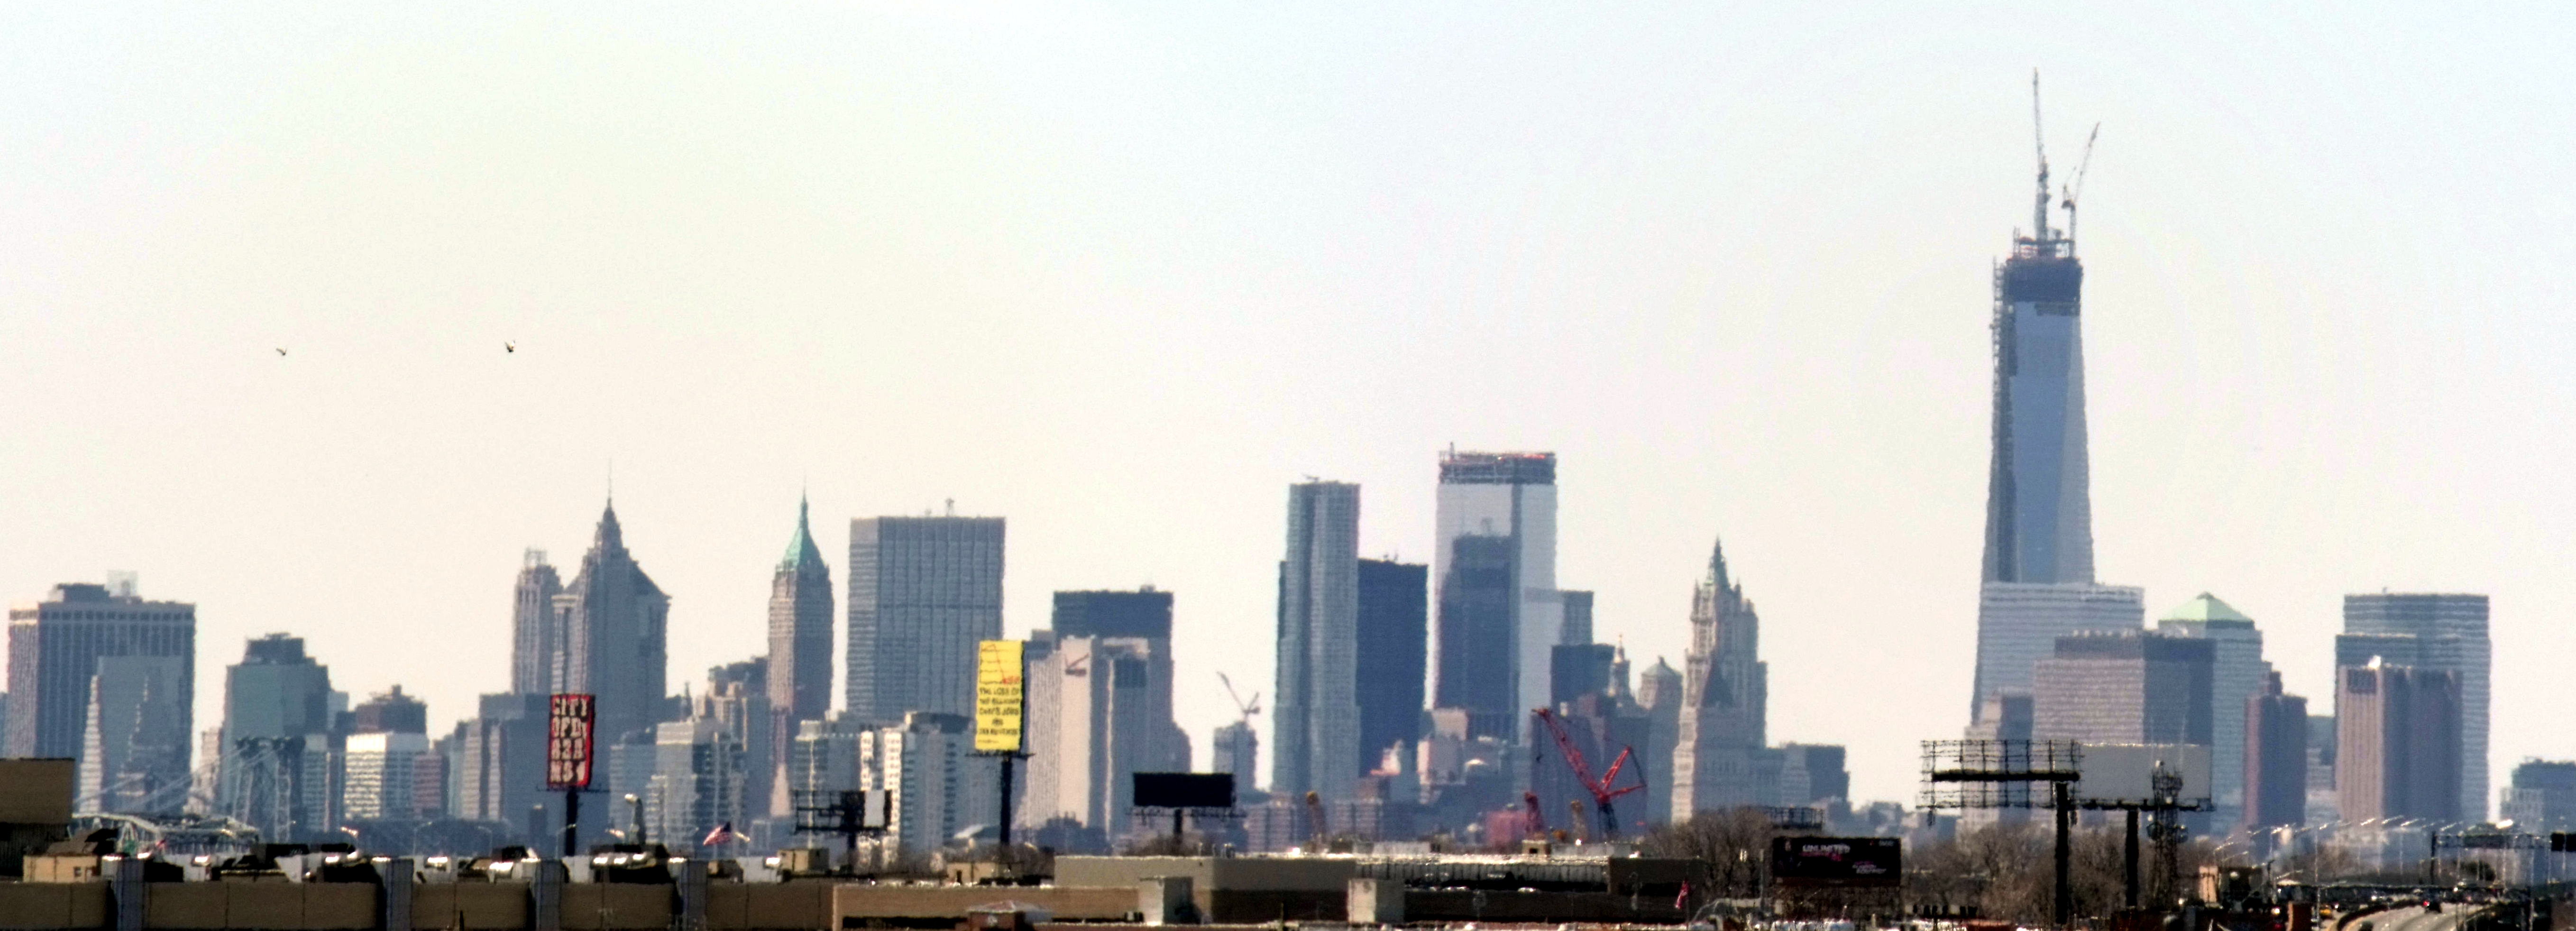 The Freedom Tower in April 2013 A panorama from Queens